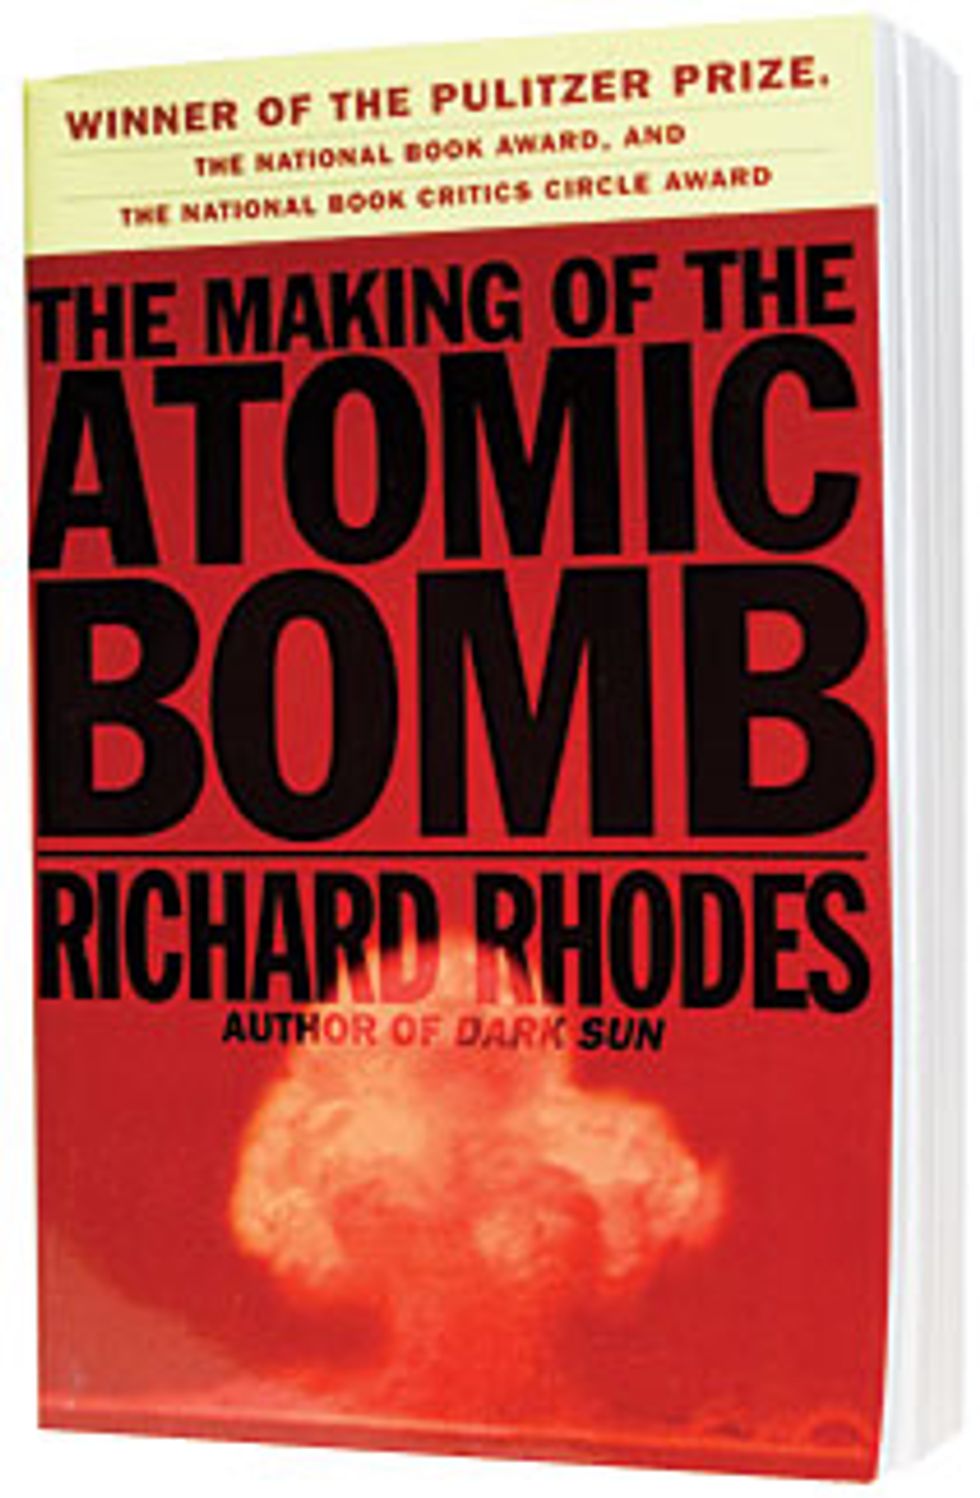 photo of book cover 'The Making of the Atomic Bomb'